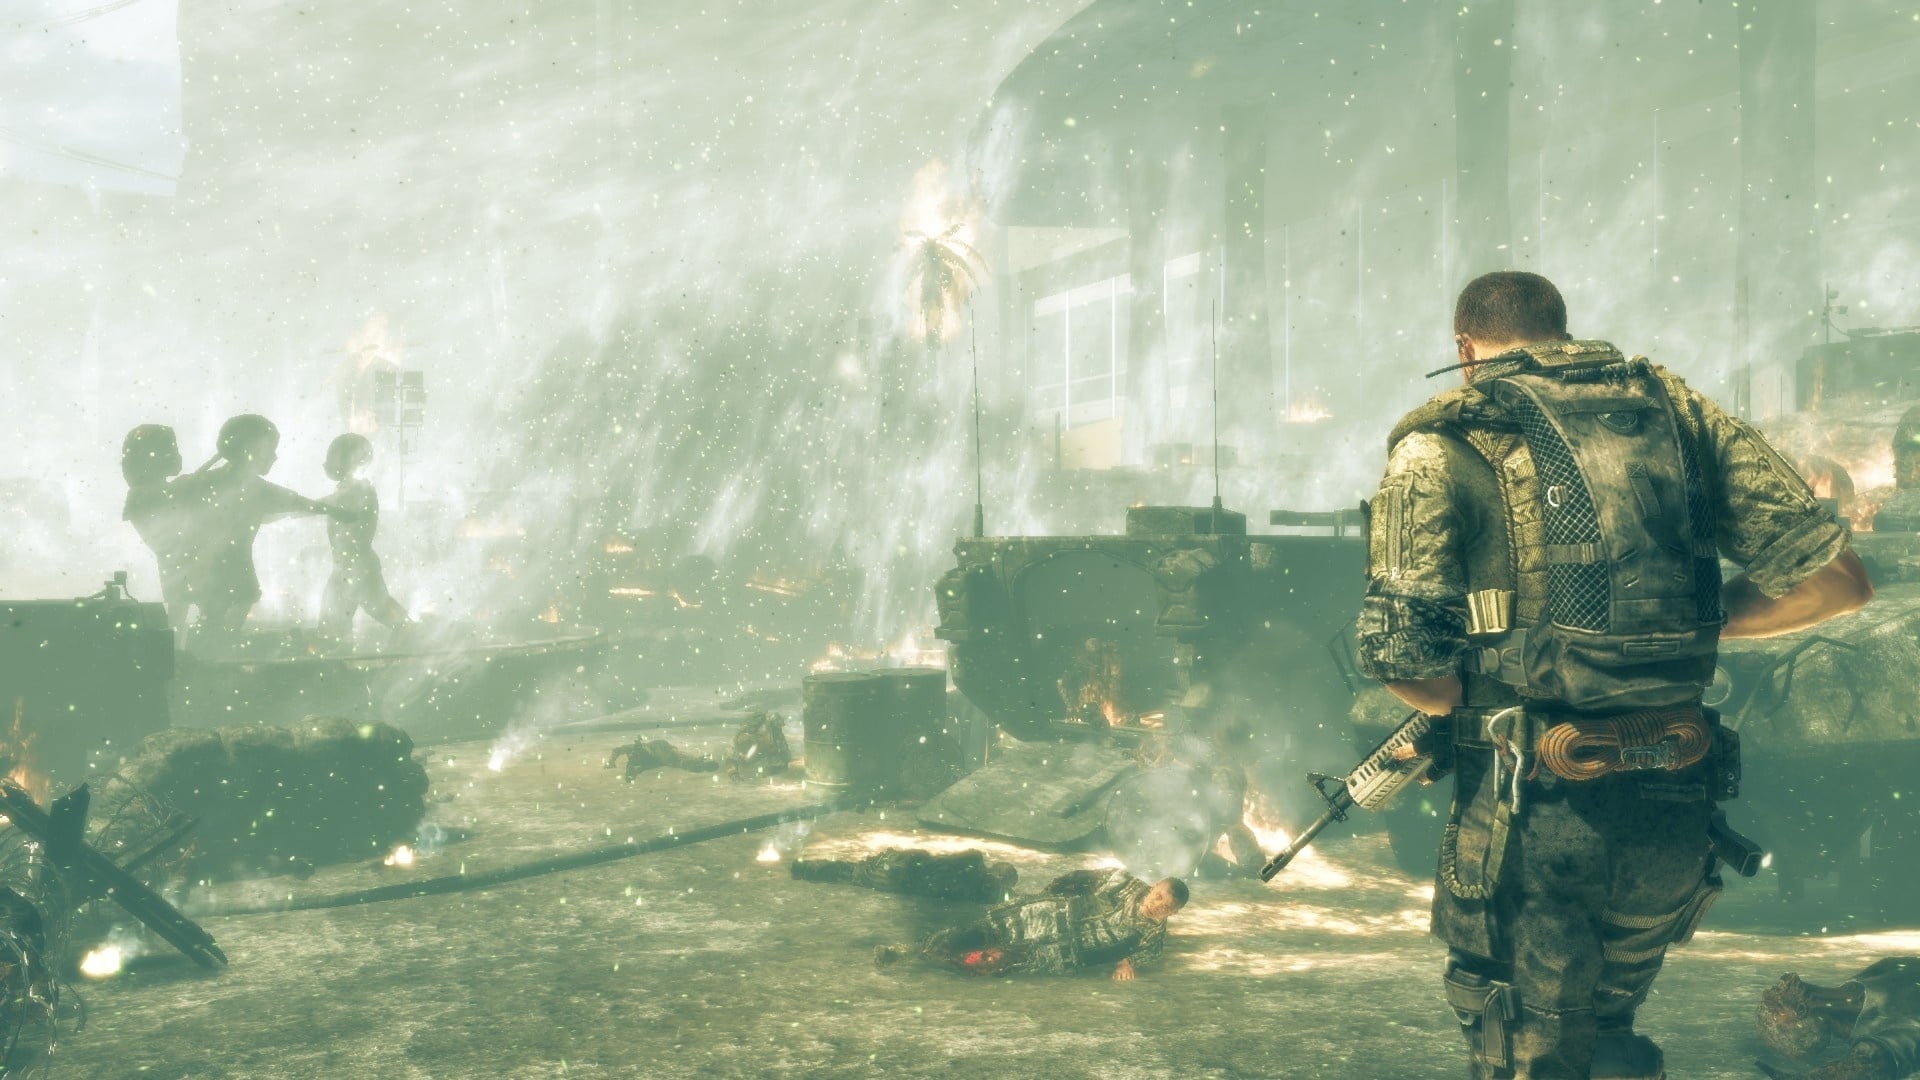 The use of White Phosphorus represents a turning point in the game.